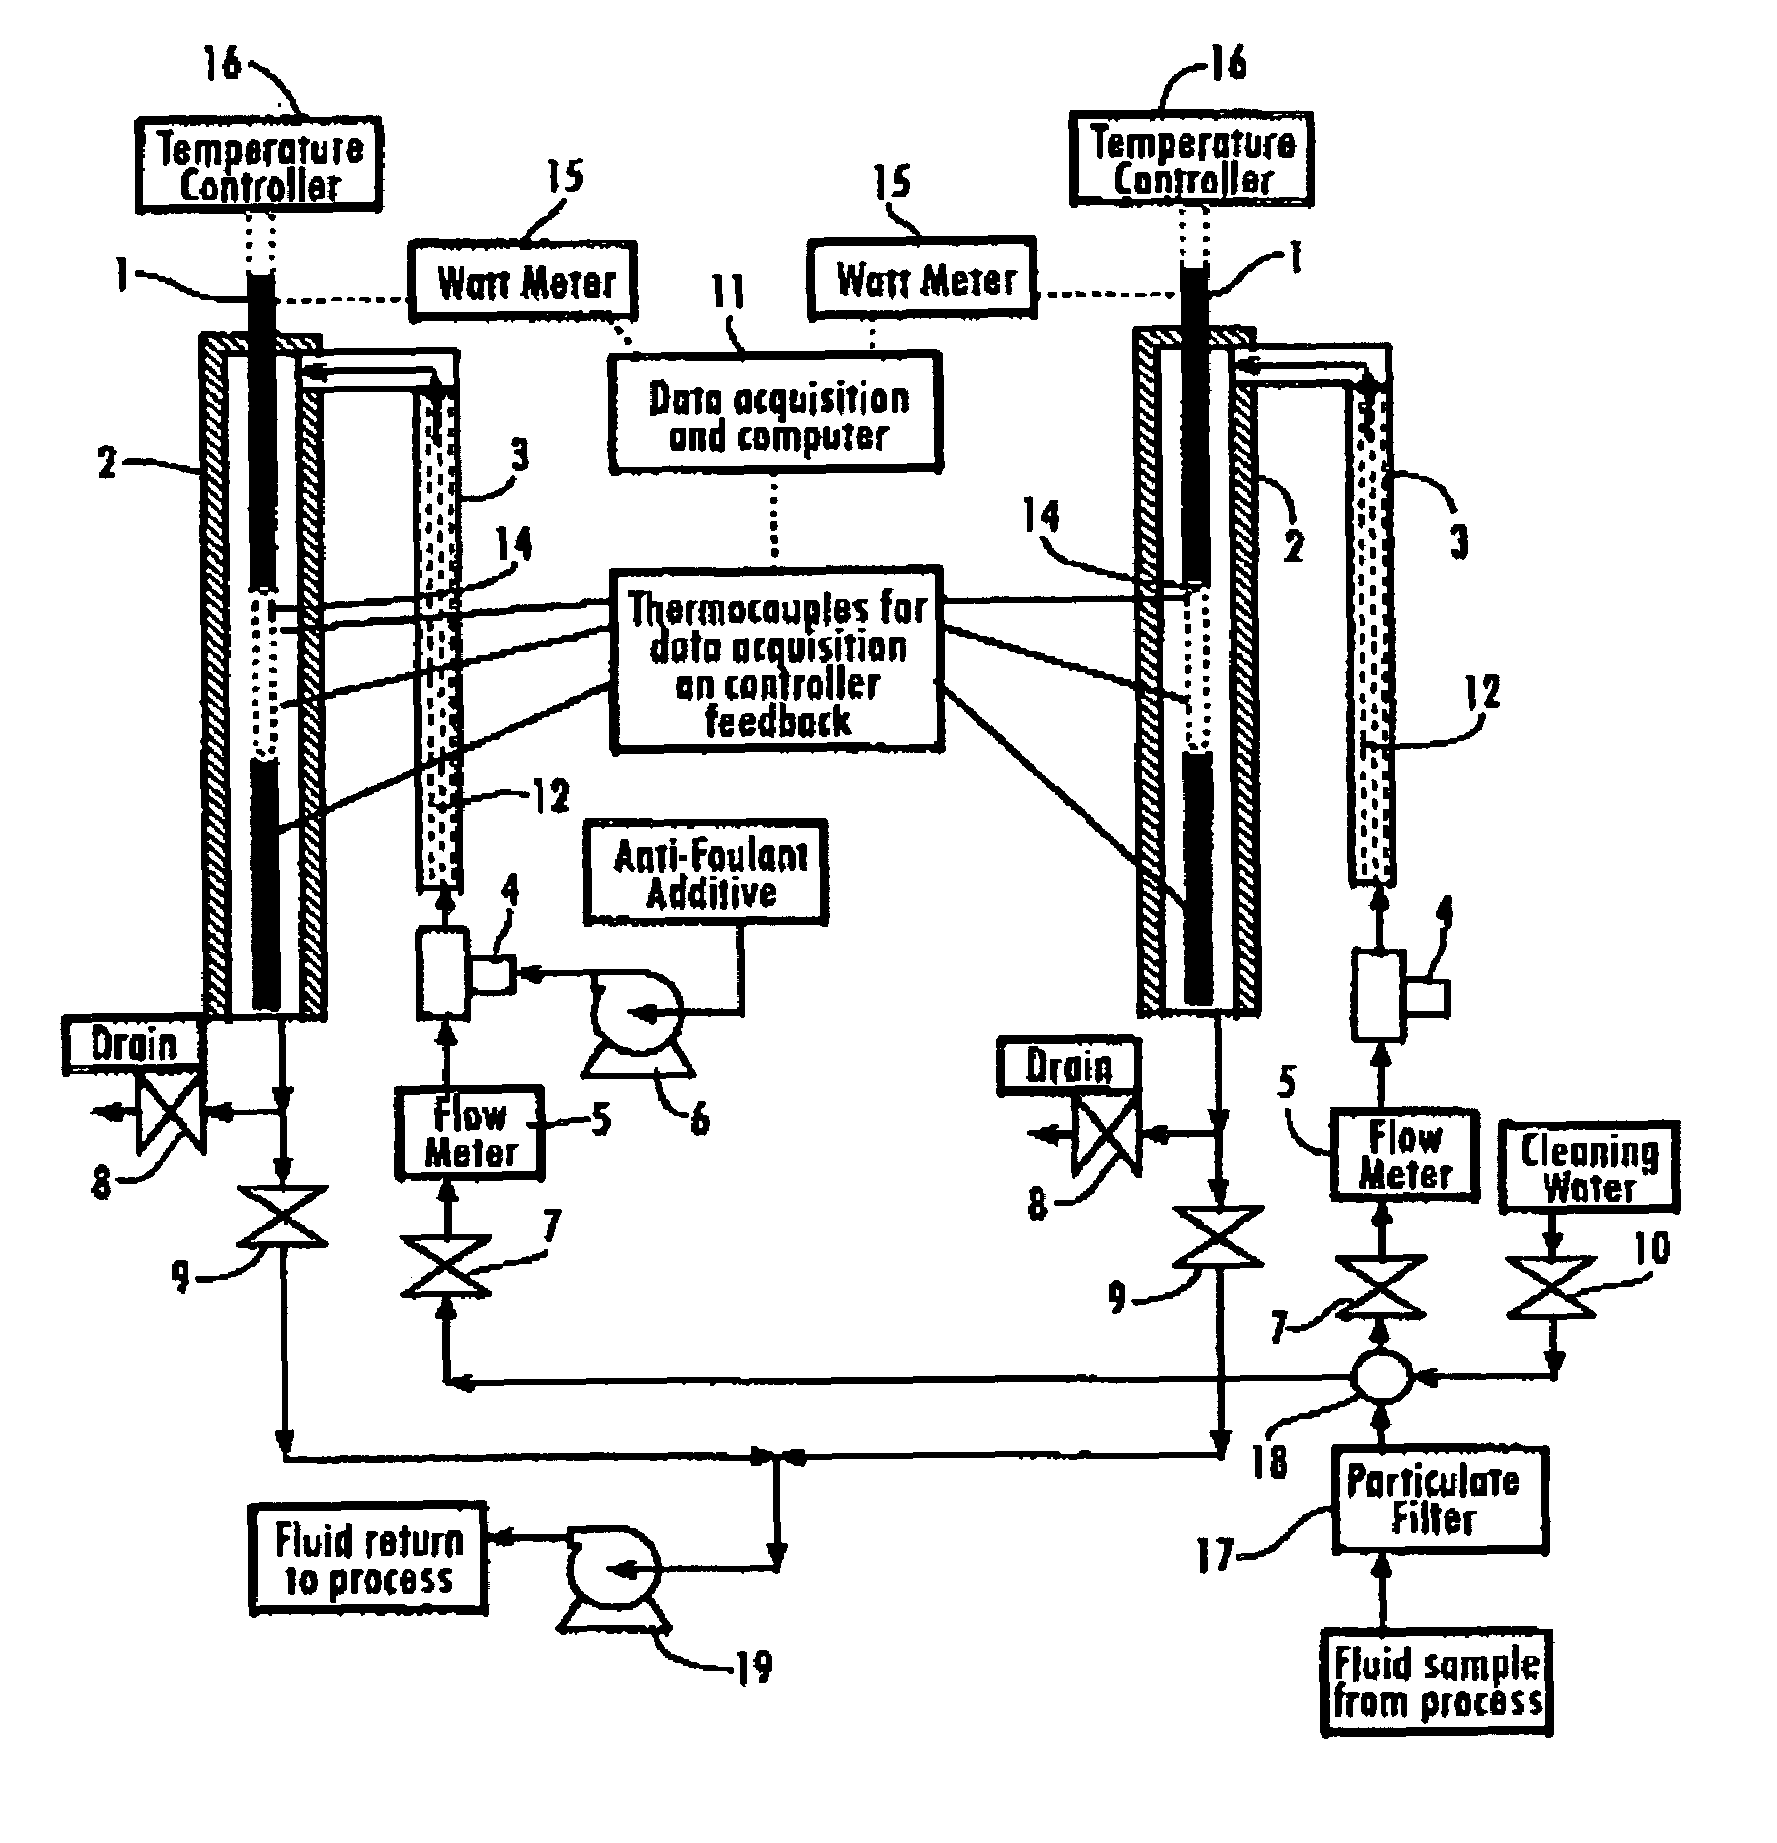 Fouling test apparatus and process for evaluation of anti-foulants